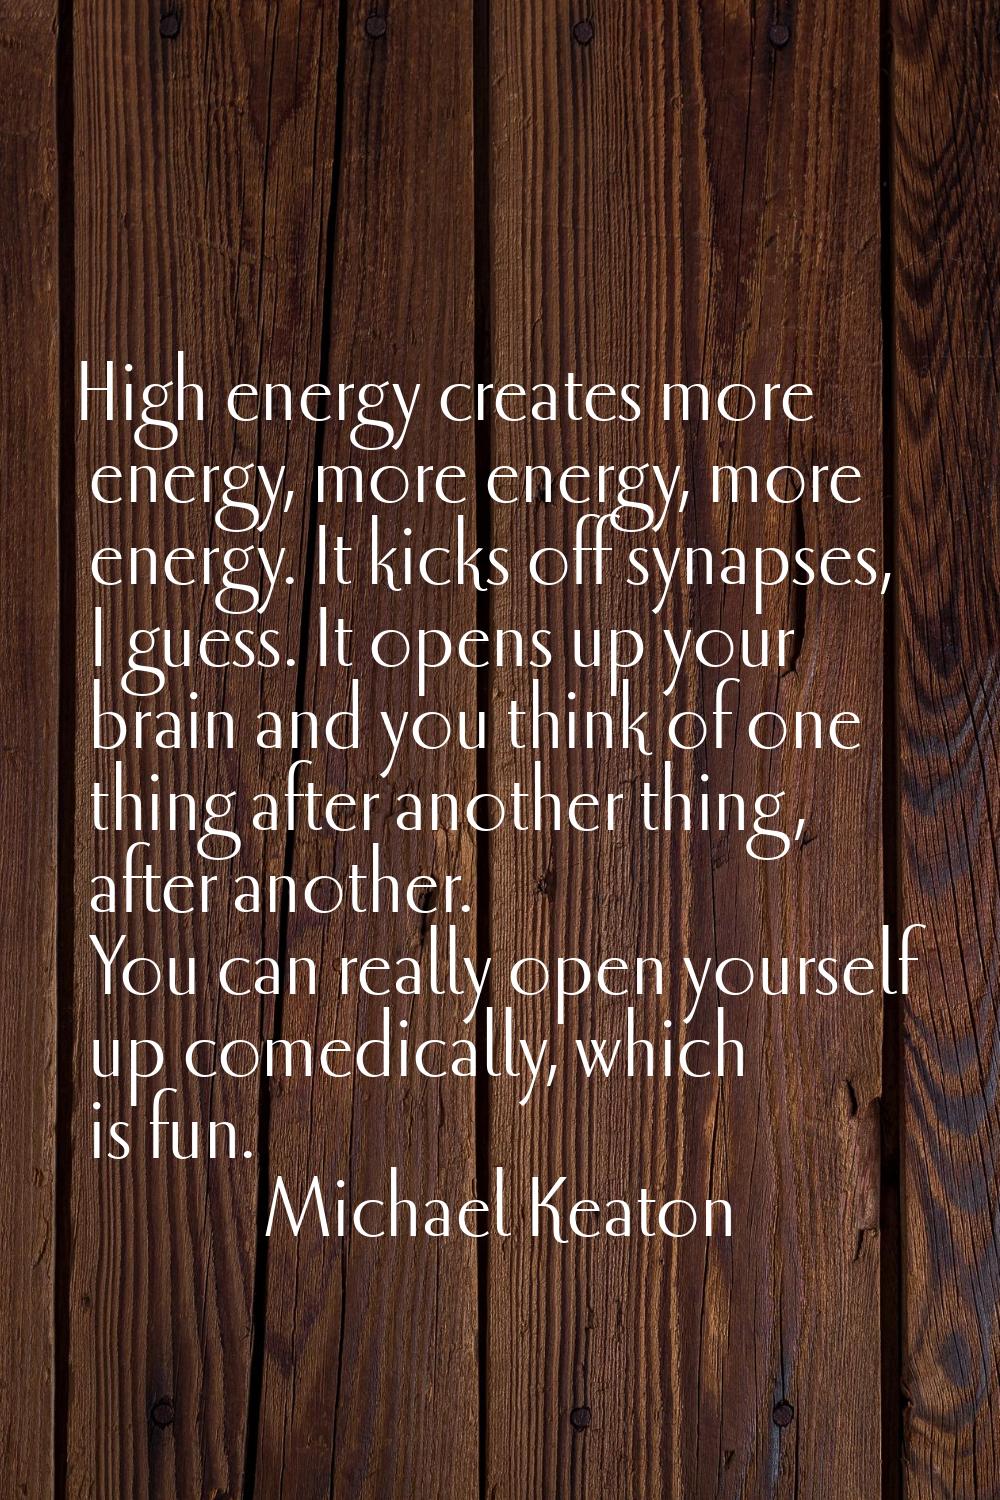 High energy creates more energy, more energy, more energy. It kicks off synapses, I guess. It opens